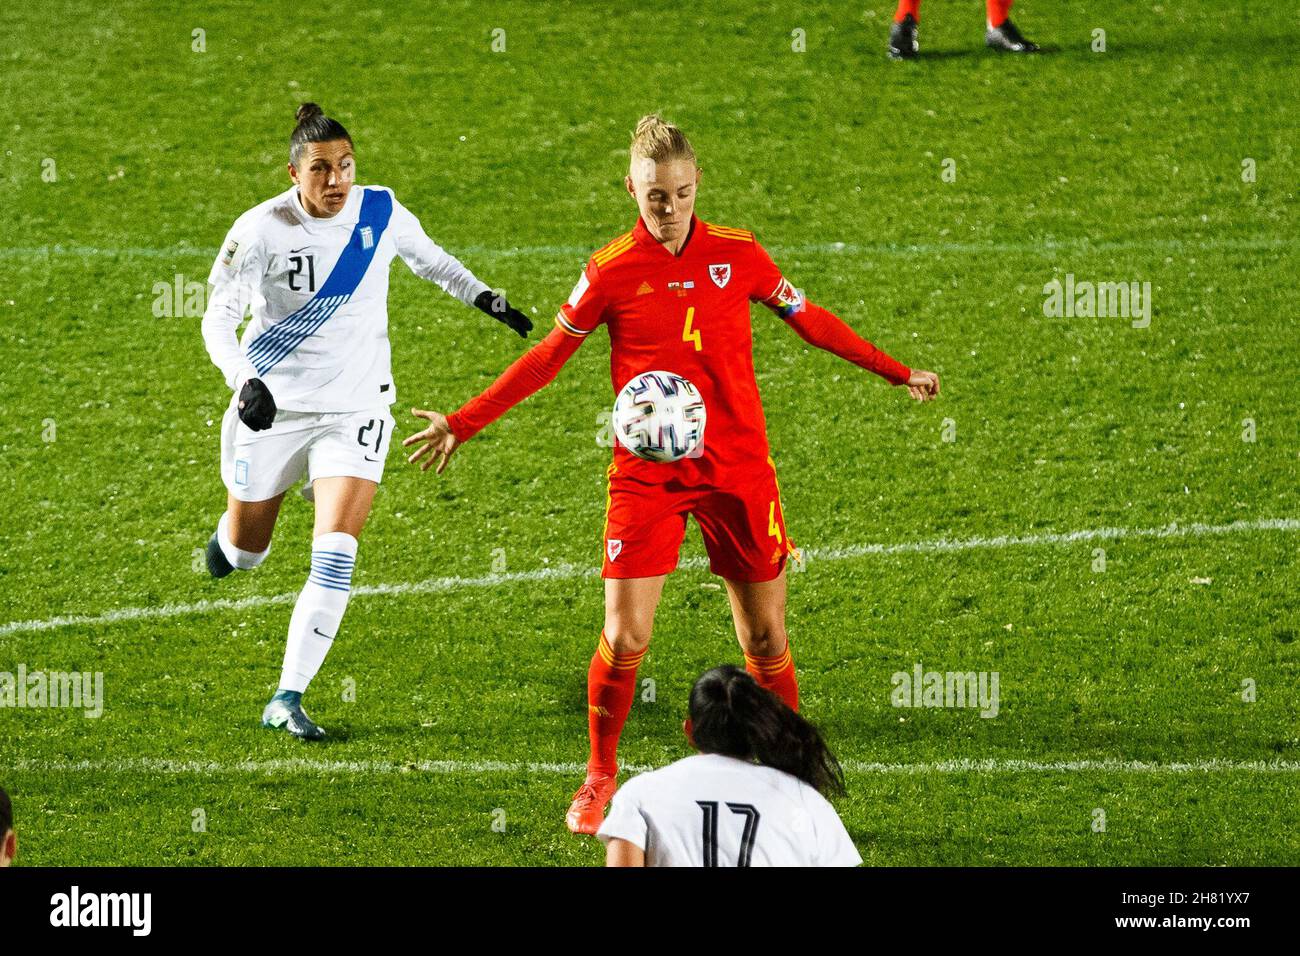 Llanelli, UK. 26 November, 2021. Sophie Ingle of Wales during the Wales v Greece Women's World Cup Qualification match. Credit: Gruffydd Thomas/Alamy Stock Photo